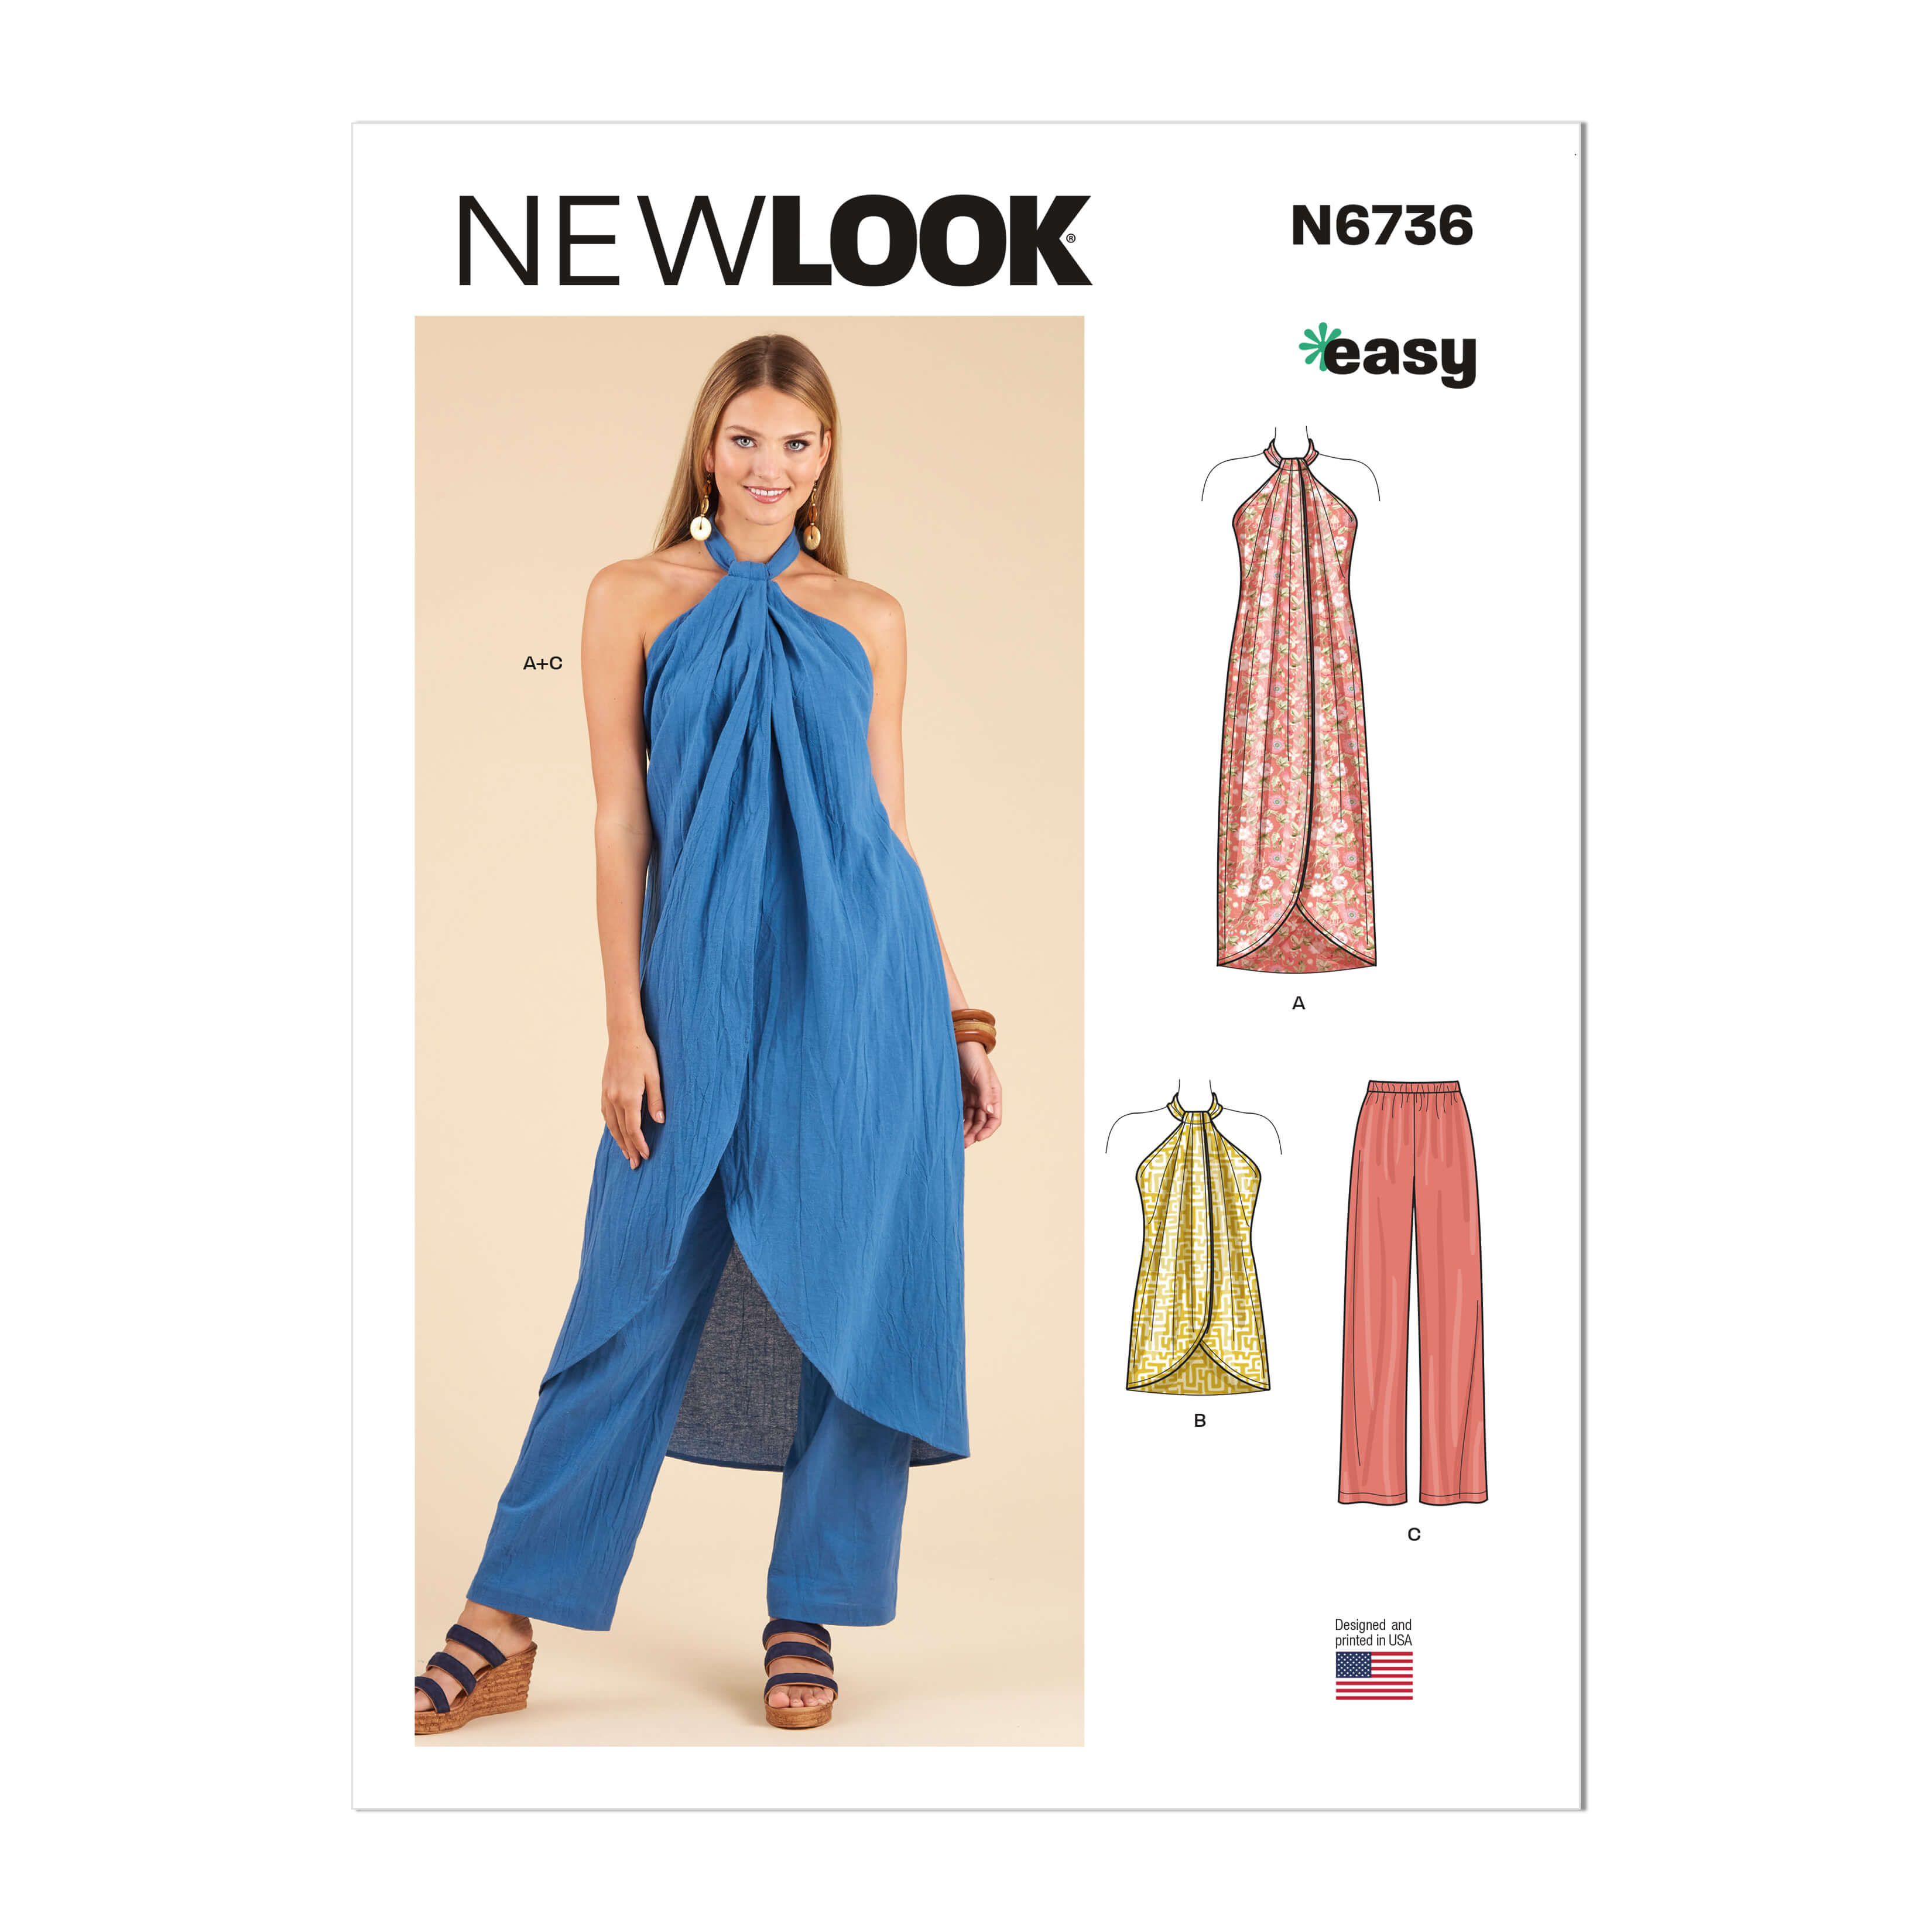 New Look Sewing Pattern N6736 Misses' Tops and Trousers